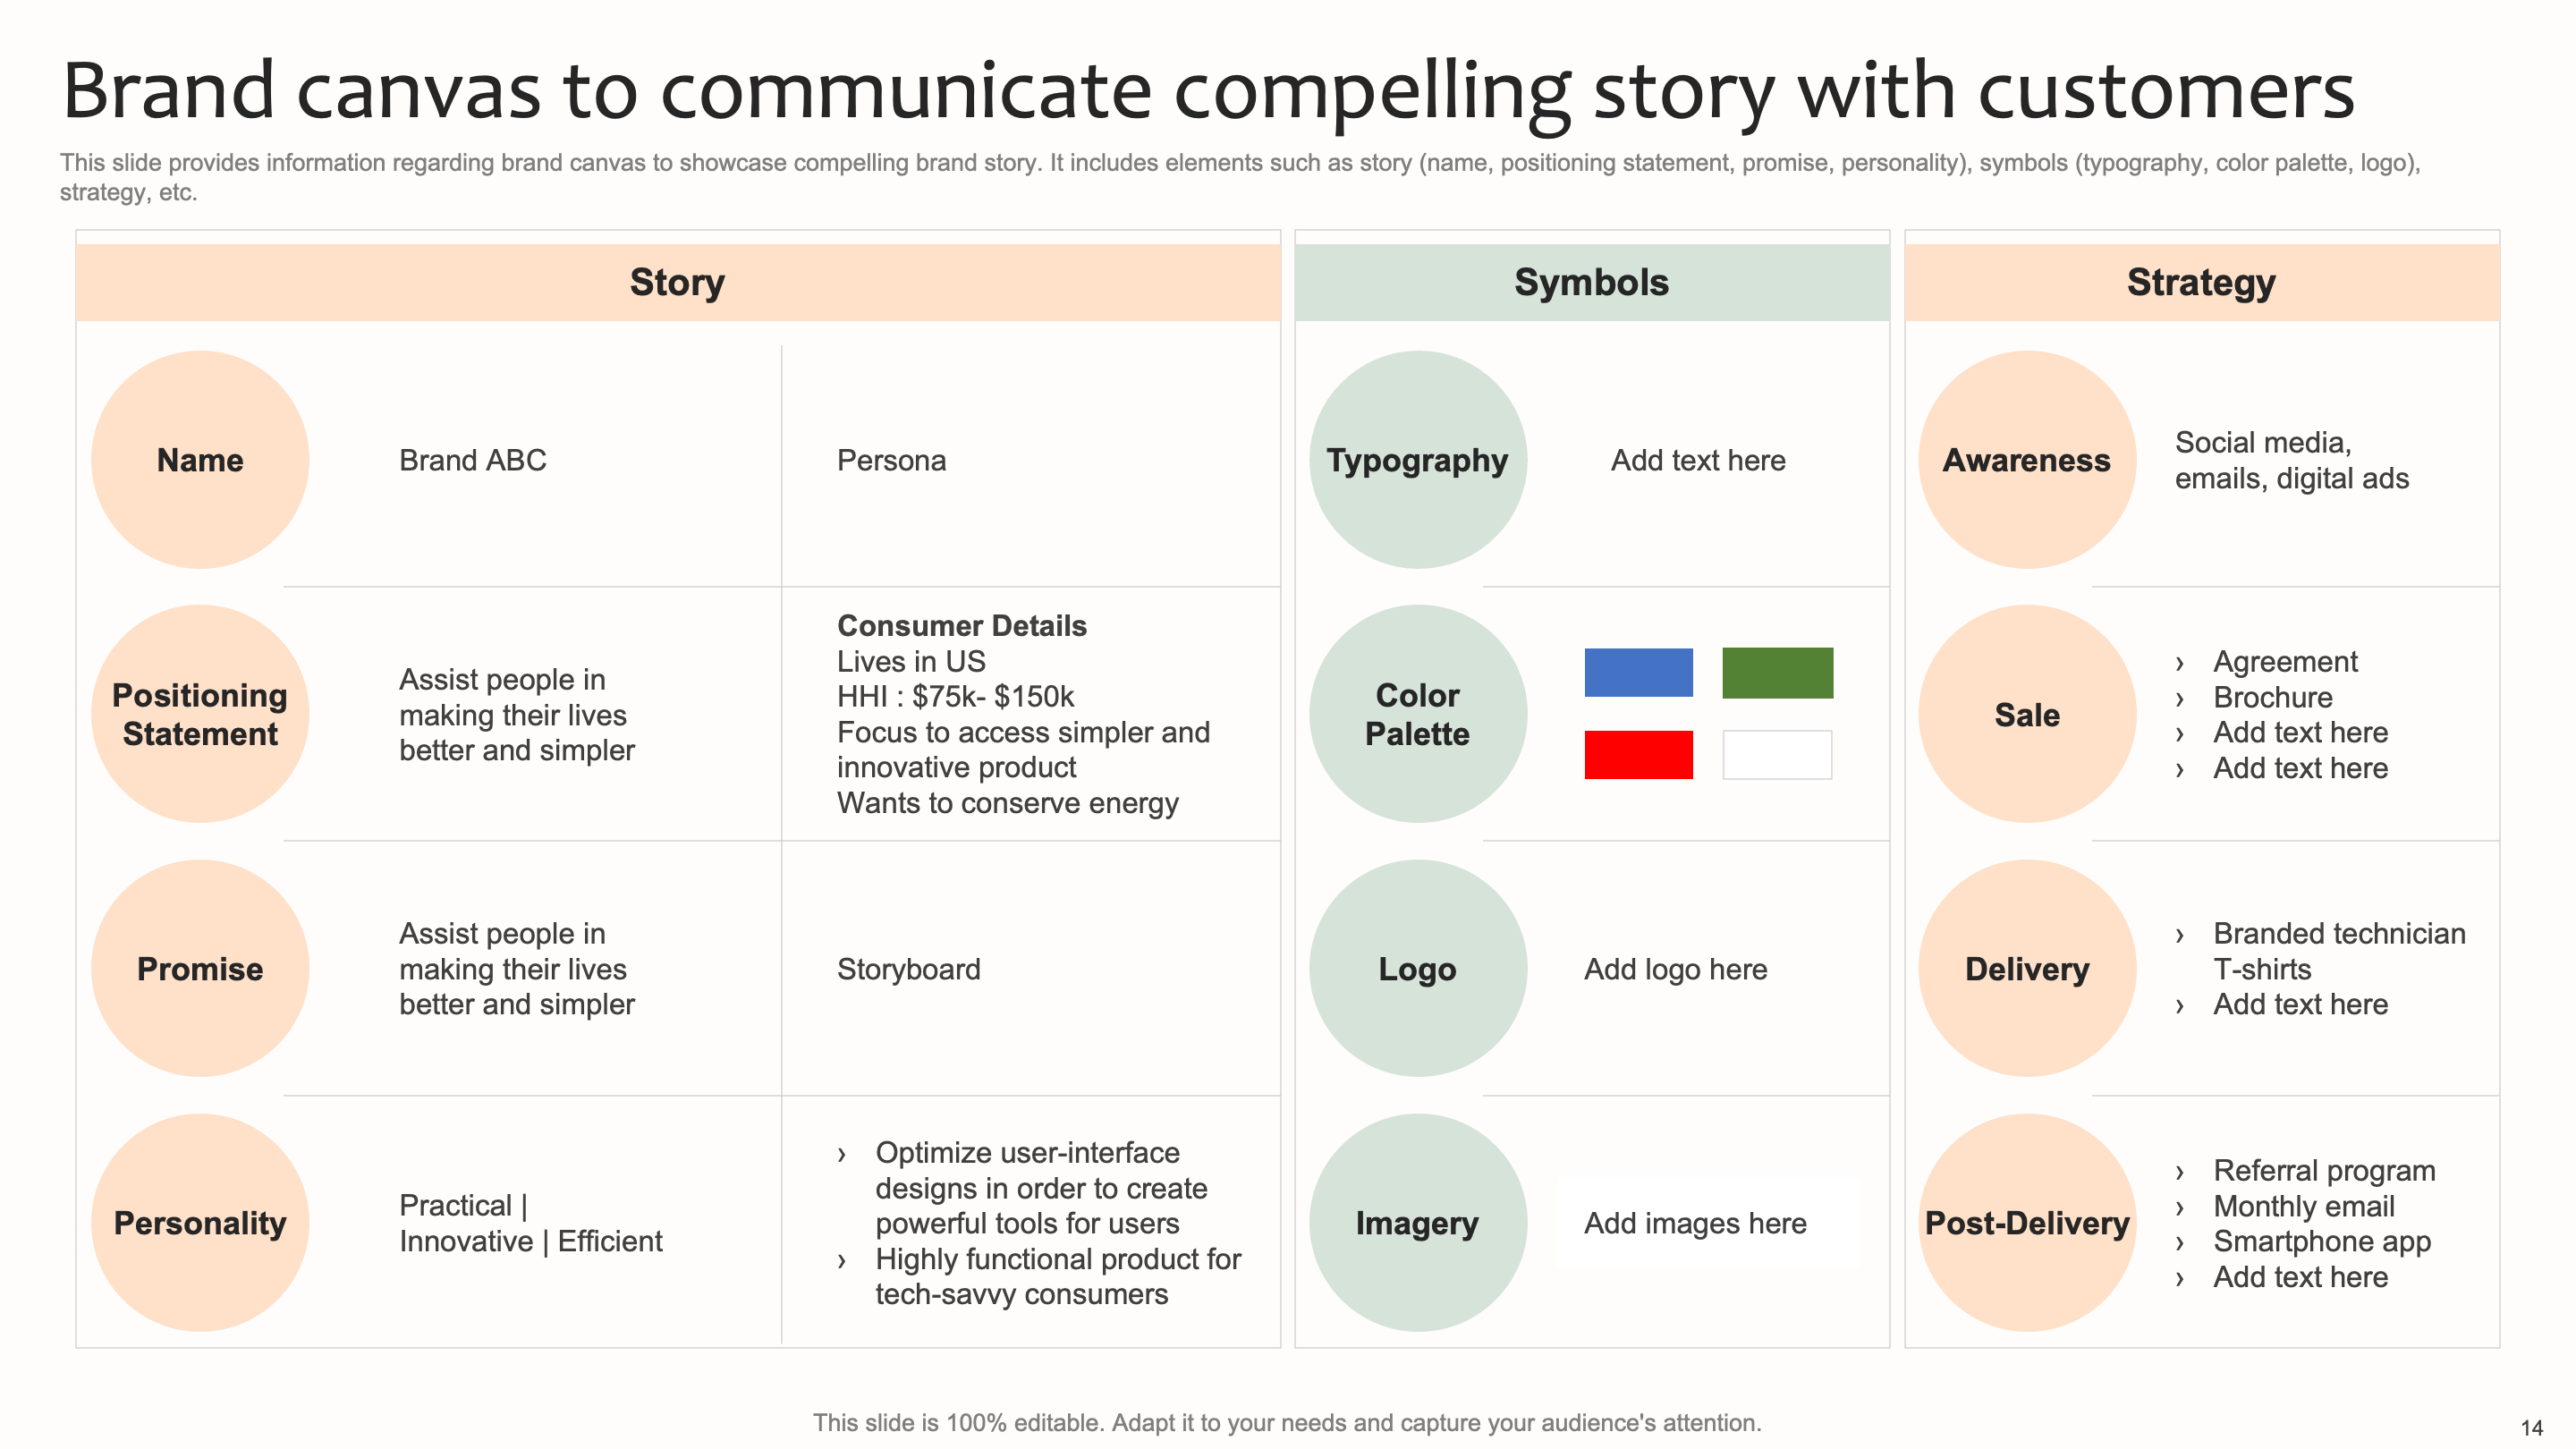 Brand Canvas to Communicate Compelling Stories